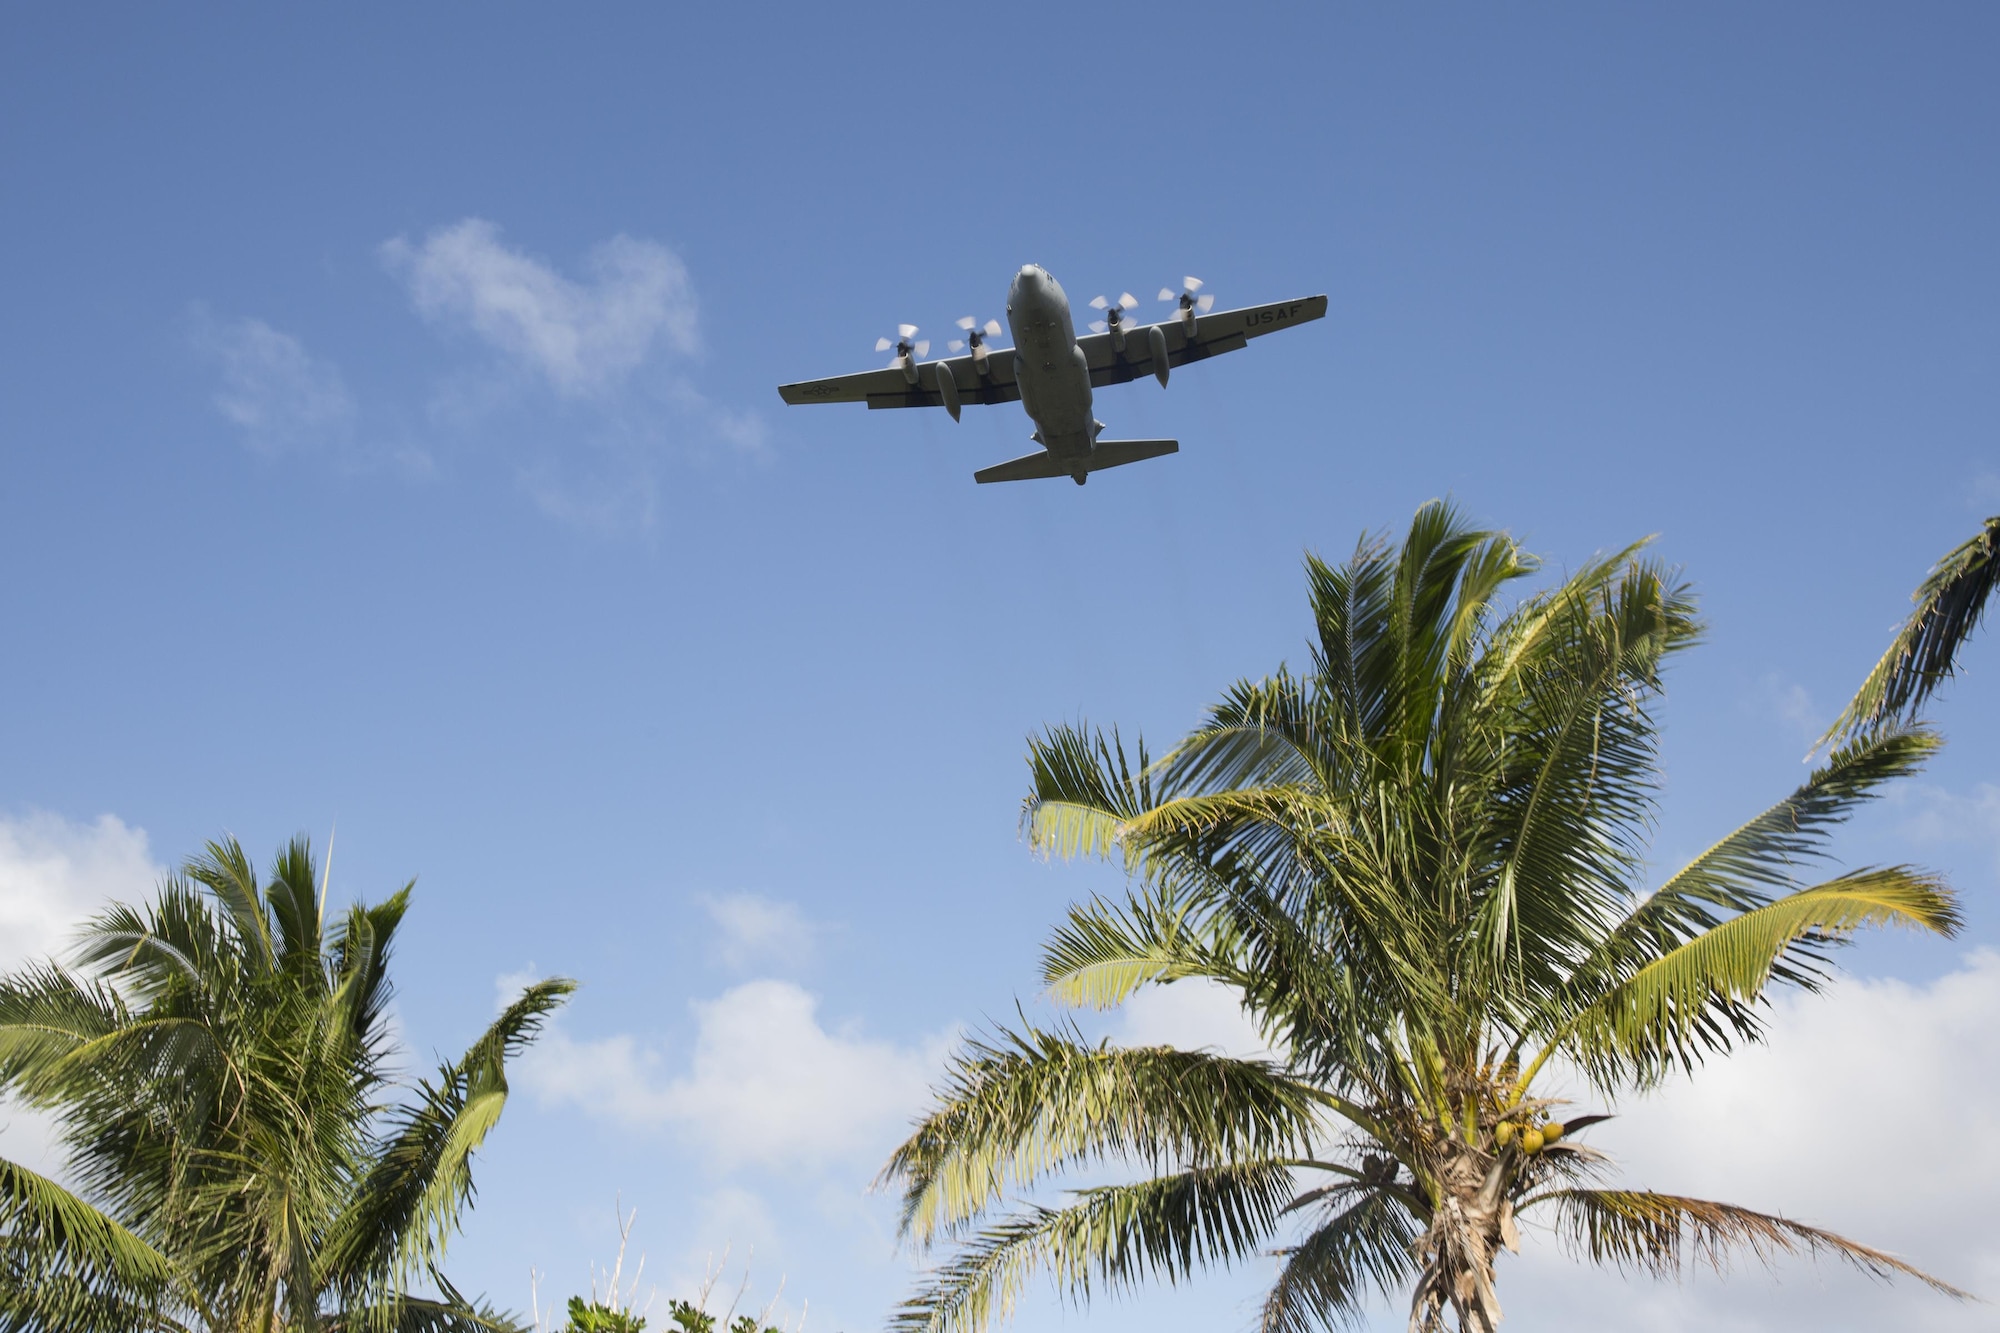 A C-130 Hercules assigned to the 36th Airlift Squadron drops a bundles during Operation Christmas Drop 2015, at Fais island, Federated States of Micronesia, Dec. 8, 2015. Airmen delivered over 800 pounds of supplies to the island of Fais during Operation Christmas Drop 2015. This year marks the first trilateral Operation Christmas Drop where the U.S. Air Force, Japan Air Self-Defense Force and the Royal Australian Air Force work together to provide critical supplies to 56 Micronesian islands. (U.S. Air Force photo by Osakabe Yasuo/Released)